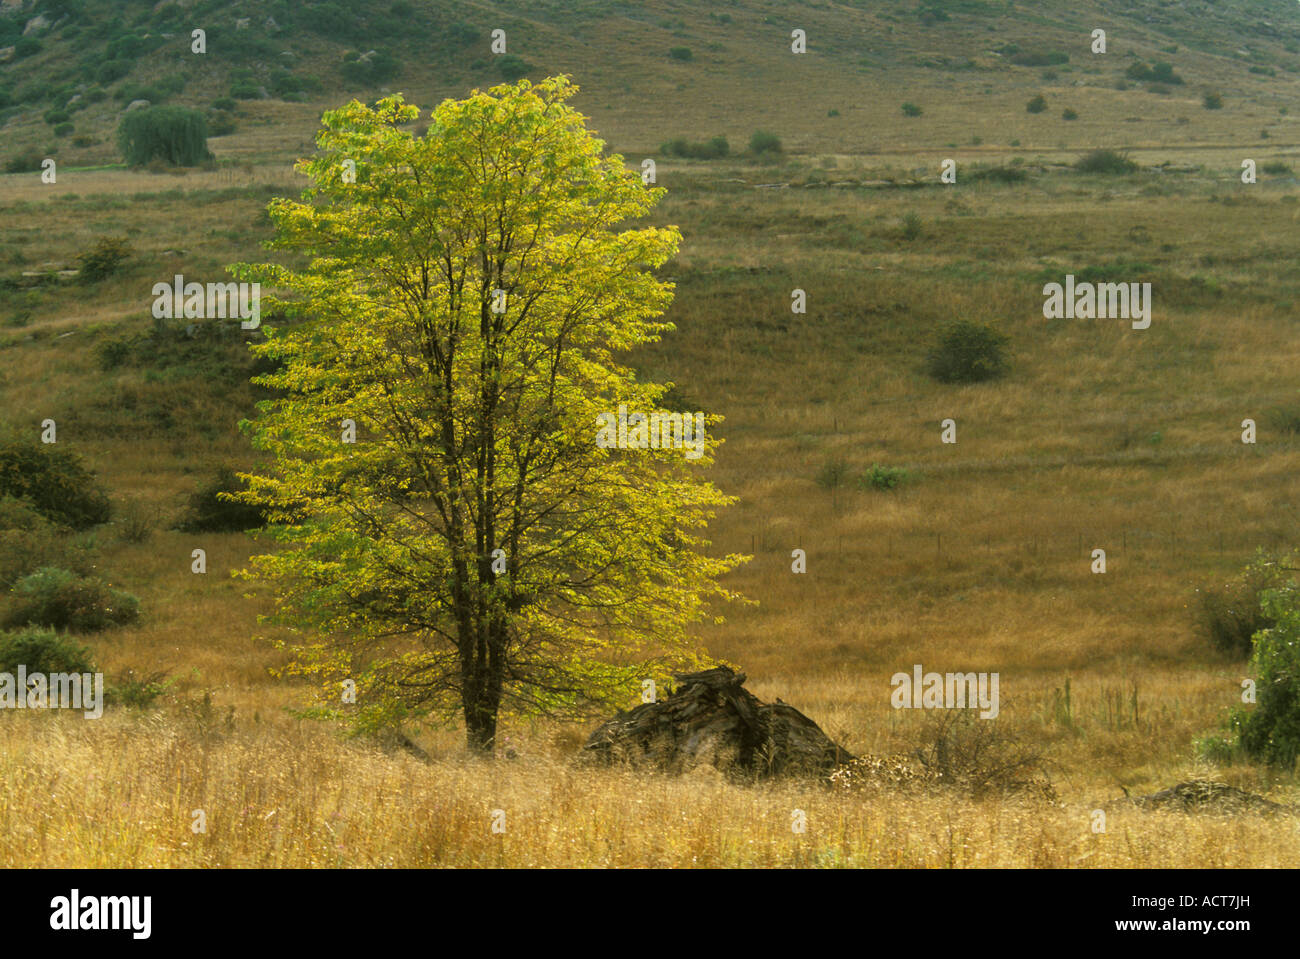 An isolated yellow flowering tree in a grassy landscape Eastern Freestate South Africa Stock Photo